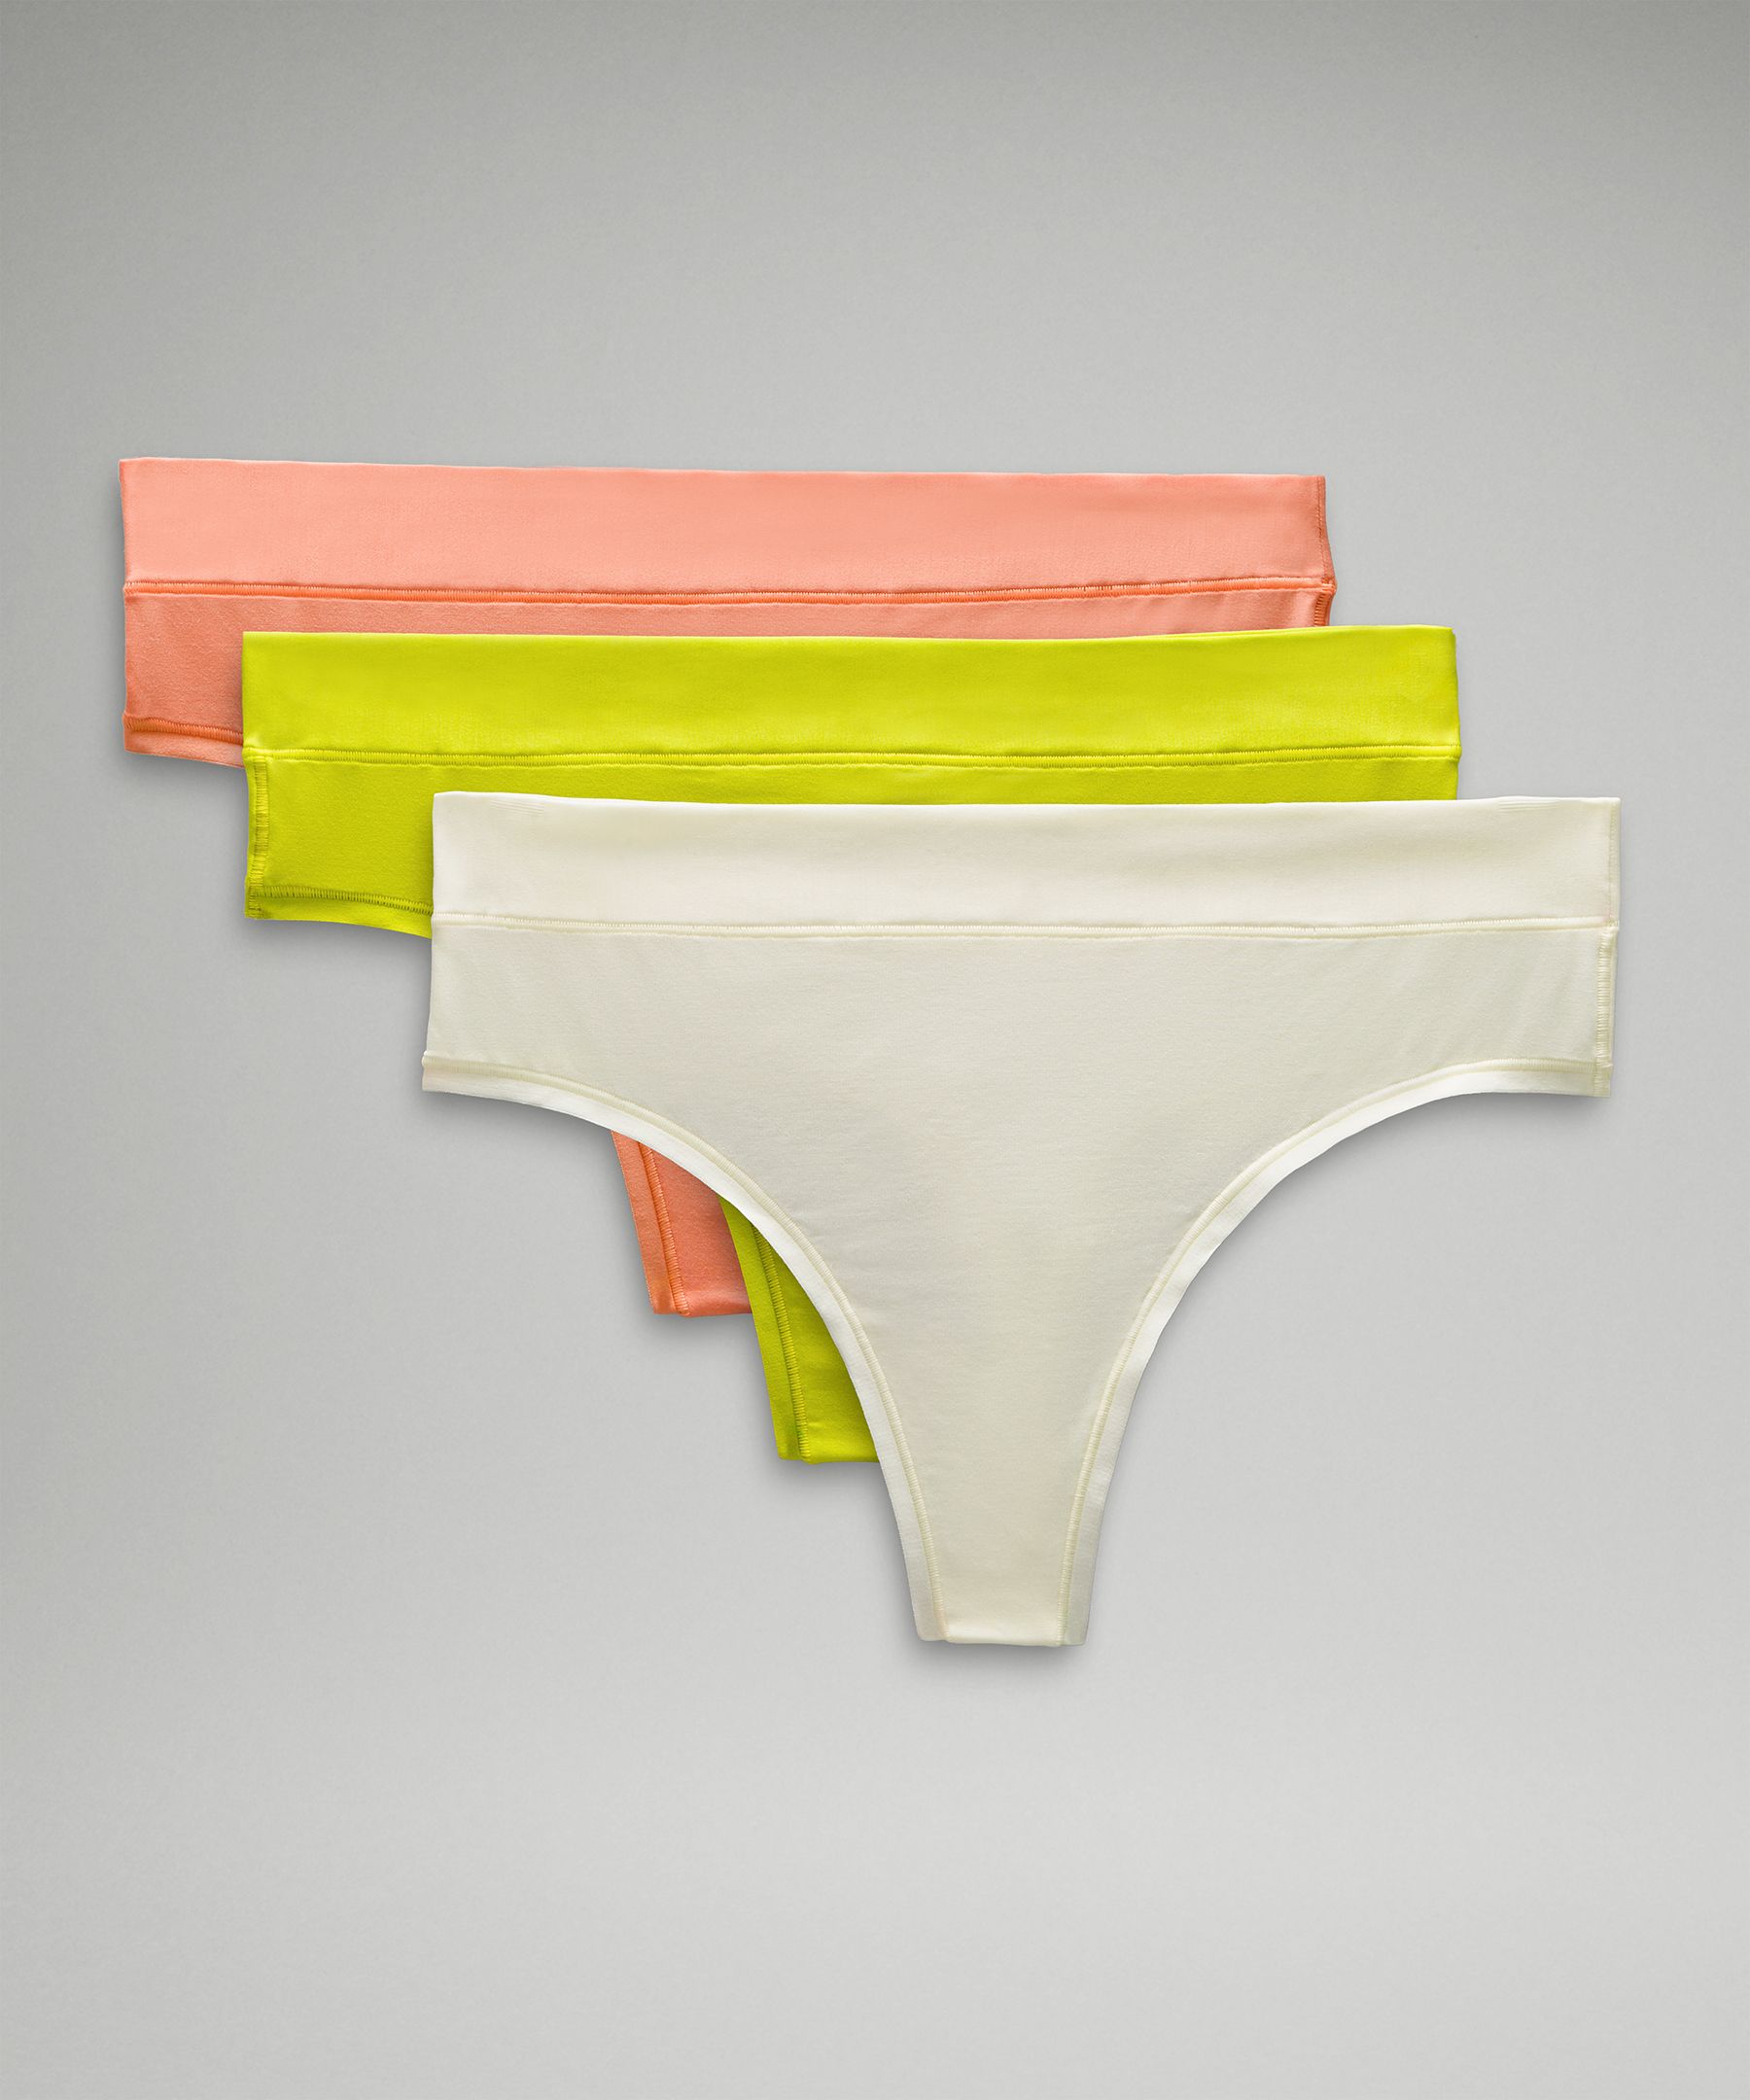 National Underwear Day: Best Underwear From Lululemon, Hanky Panky and More